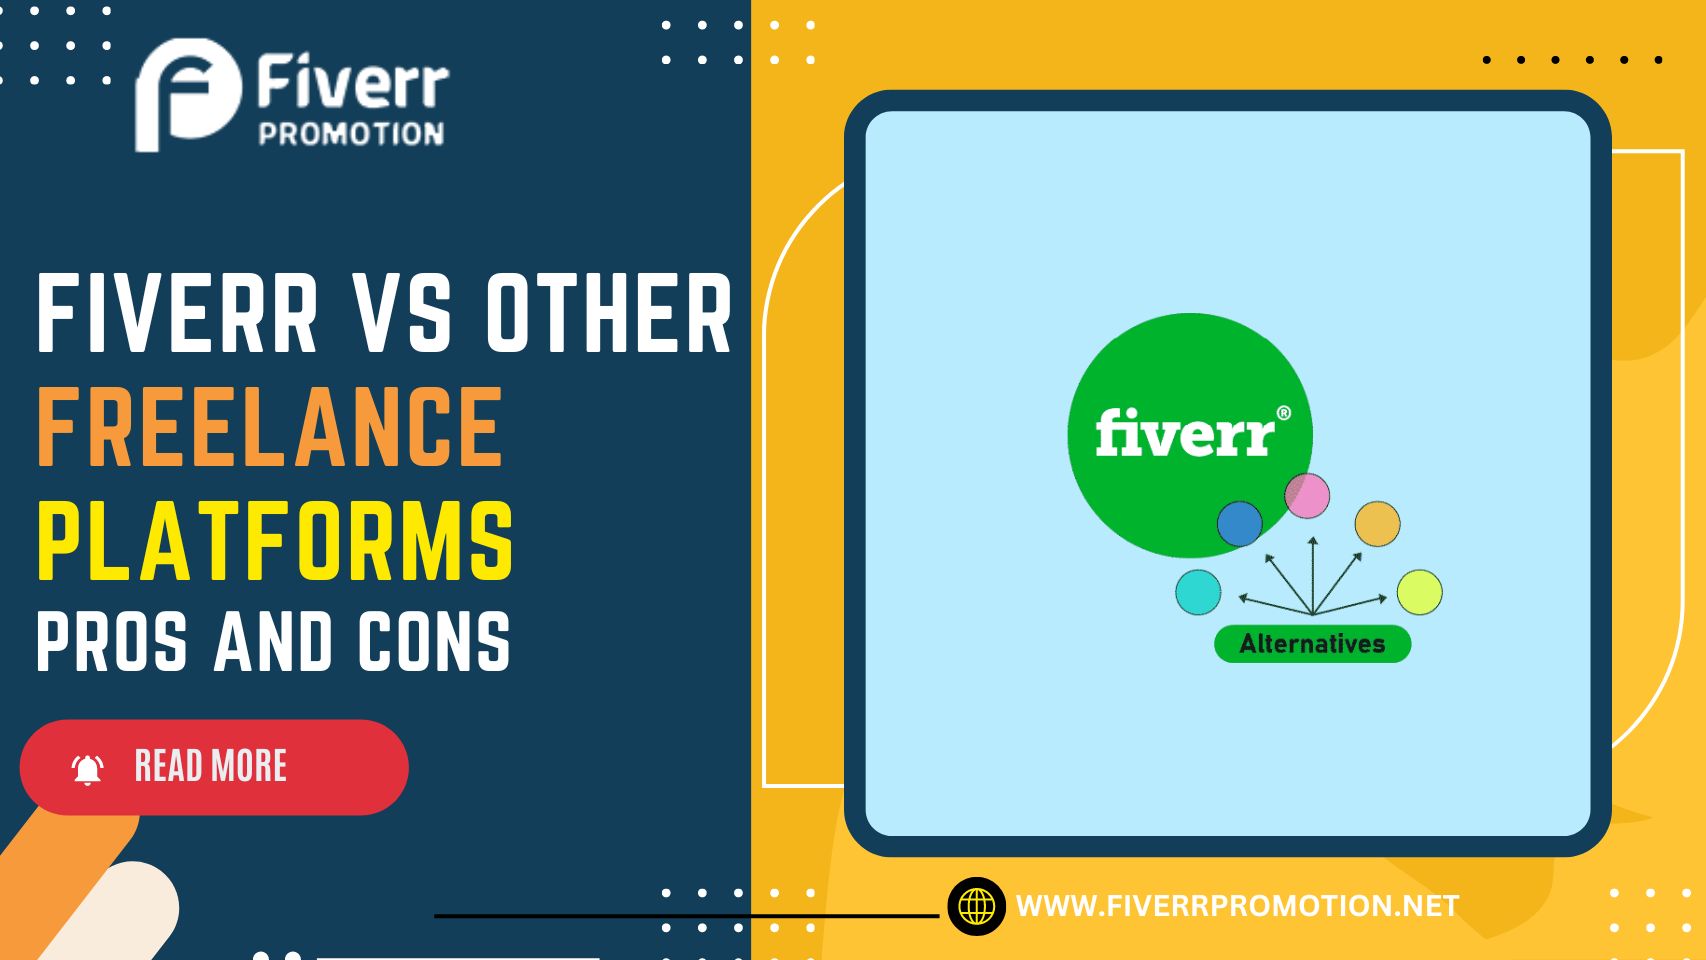 Fiverr vs Other Freelance Platforms: Pros and Cons